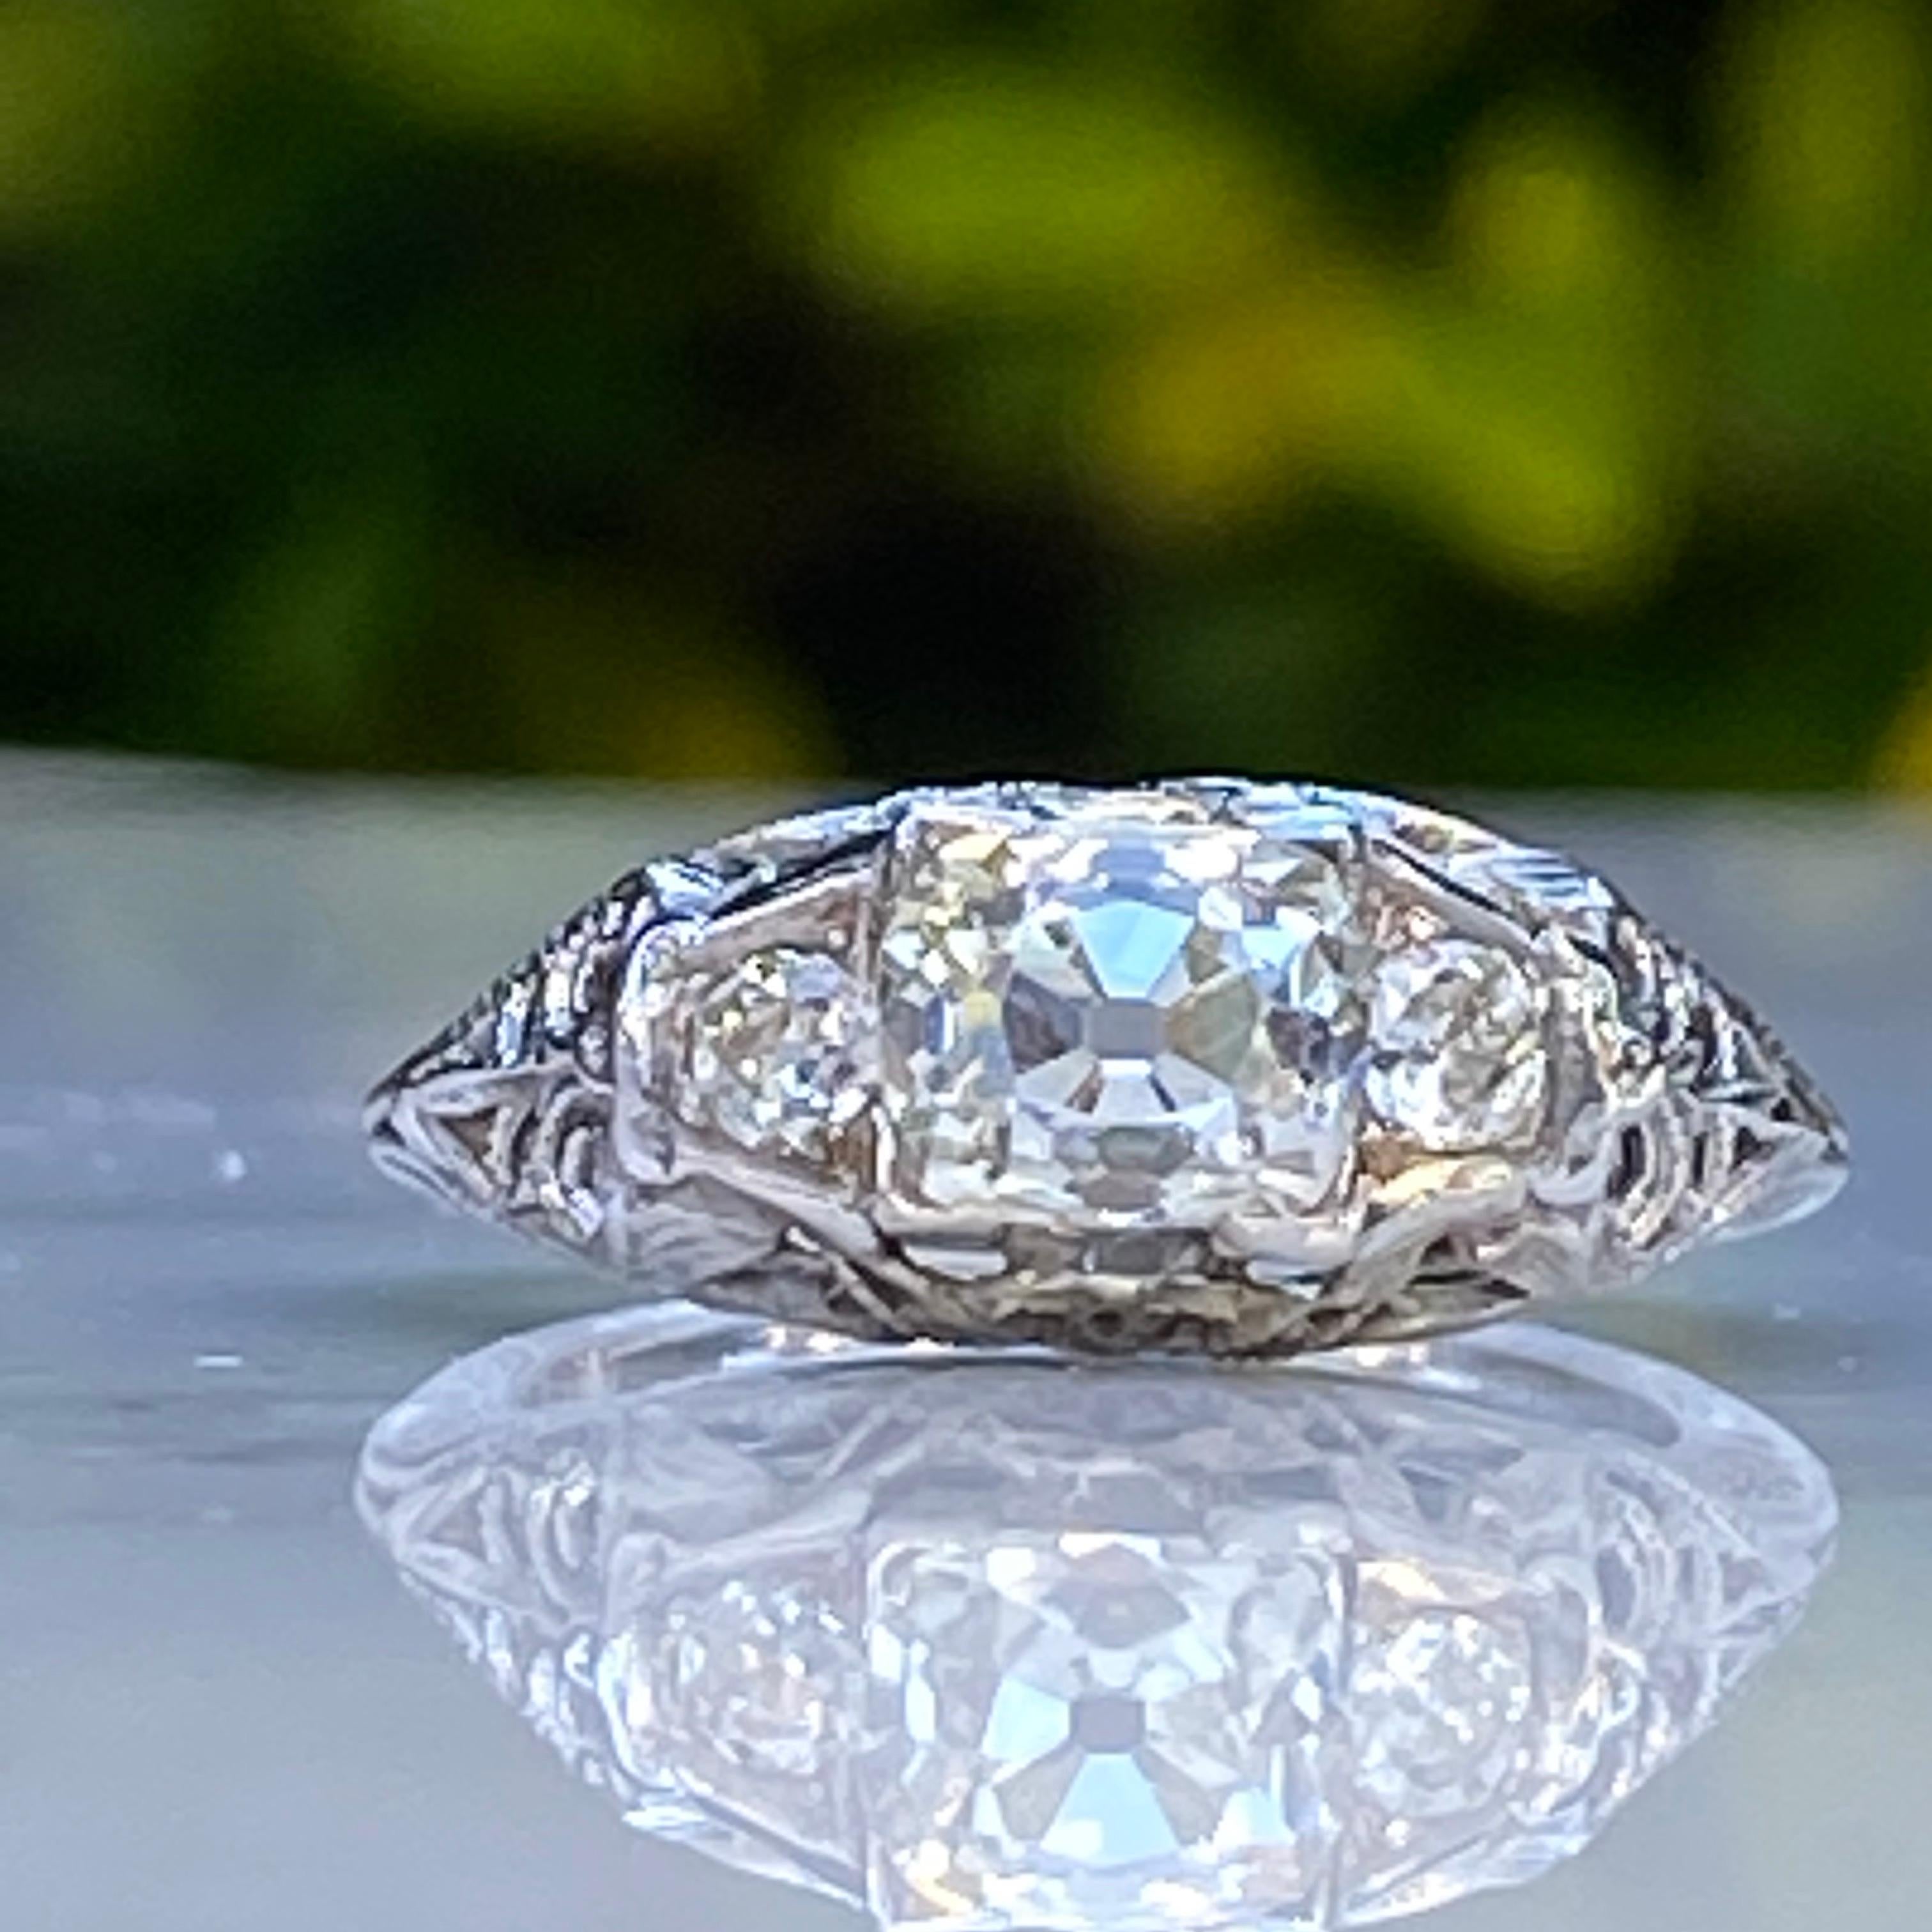 Details:
Fantastic 18K white gold filigree 1.37 carat old mine cut diamond ring from the 1920's! The filigree is intricate and delicate, and the ring has a great low profile setting. This ring comes with an appraisal.

Appraisal Notes:
Old mine cut